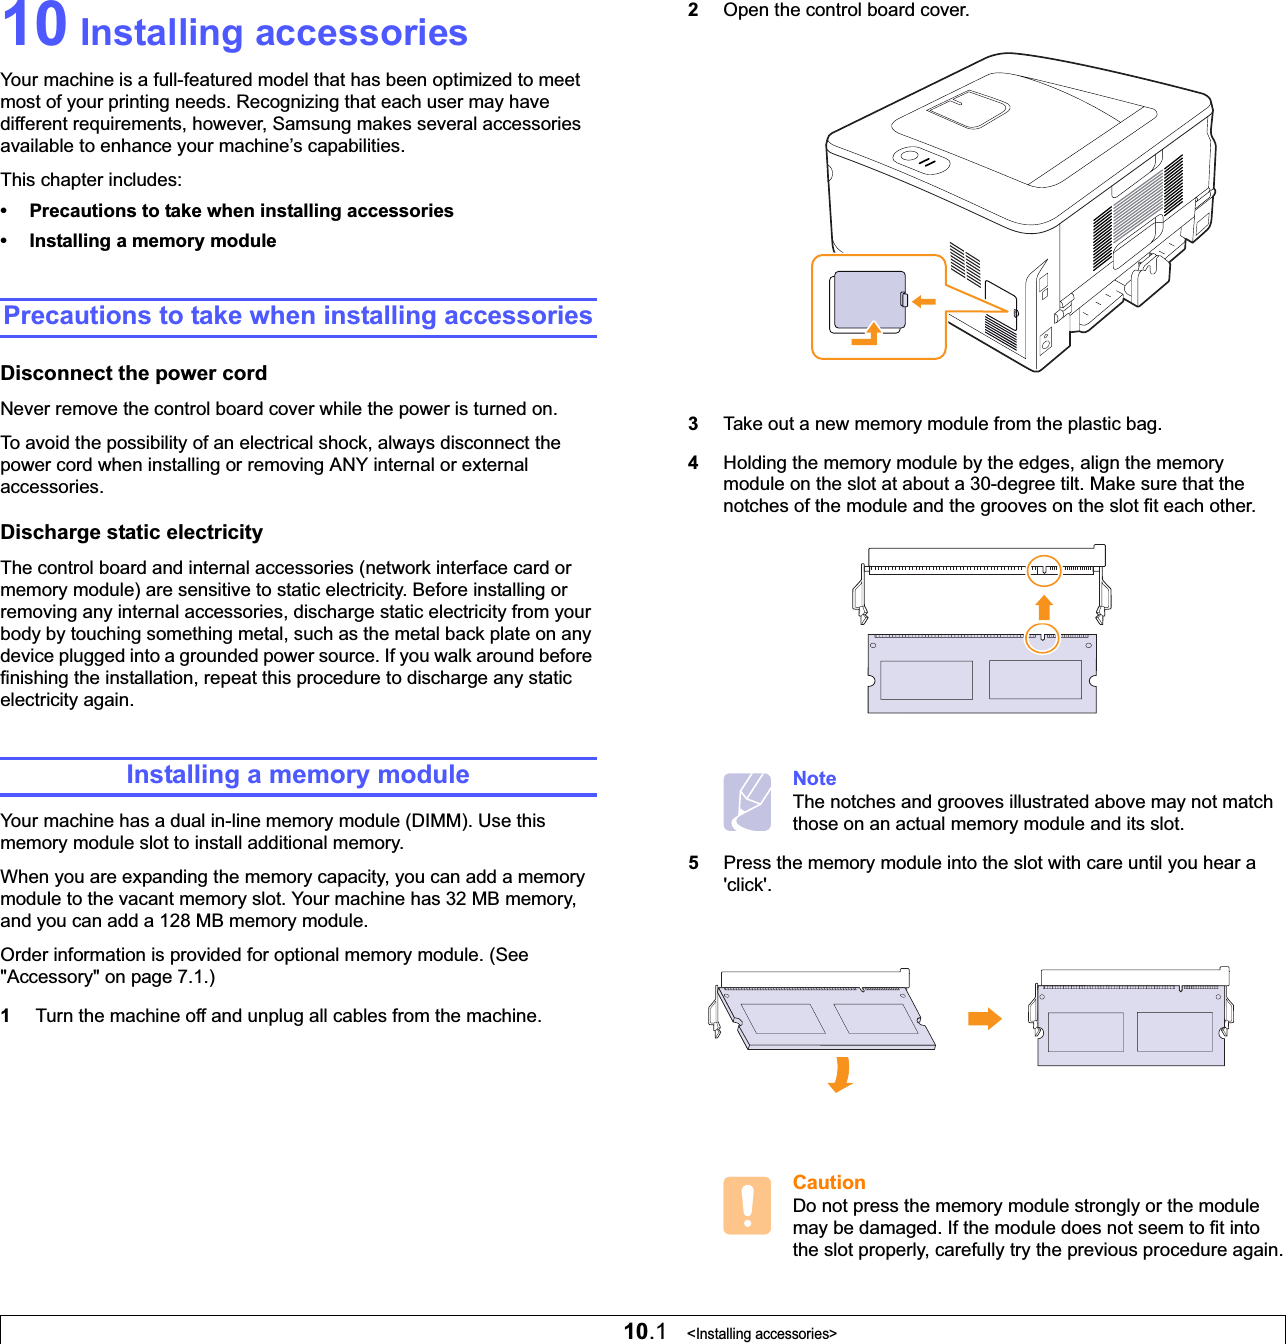 10.1   &lt;Installing accessories&gt;10 Installing accessoriesYour machine is a full-featured model that has been optimized to meet most of your printing needs. Recognizing that each user may have different requirements, however, Samsung makes several accessories available to enhance your machine’s capabilities.This chapter includes:• Precautions to take when installing accessories• Installing a memory modulePrecautions to take when installing accessoriesDisconnect the power cordNever remove the control board cover while the power is turned on.To avoid the possibility of an electrical shock, always disconnect the power cord when installing or removing ANY internal or external accessories.Discharge static electricityThe control board and internal accessories (network interface card or memory module) are sensitive to static electricity. Before installing or removing any internal accessories, discharge static electricity from your body by touching something metal, such as the metal back plate on any device plugged into a grounded power source. If you walk around before finishing the installation, repeat this procedure to discharge any static electricity again.Installing a memory moduleYour machine has a dual in-line memory module (DIMM). Use this memory module slot to install additional memory.When you are expanding the memory capacity, you can add a memory module to the vacant memory slot. Your machine has 32 MB memory, and you can add a 128 MB memory module.Order information is provided for optional memory module. (See &quot;Accessory&quot; on page 7.1.)1Turn the machine off and unplug all cables from the machine.2Open the control board cover.3Take out a new memory module from the plastic bag.4Holding the memory module by the edges, align the memory module on the slot at about a 30-degree tilt. Make sure that the notches of the module and the grooves on the slot fit each other.NoteThe notches and grooves illustrated above may not match those on an actual memory module and its slot.5Press the memory module into the slot with care until you hear a &apos;click&apos;. CautionDo not press the memory module strongly or the module may be damaged. If the module does not seem to fit into the slot properly, carefully try the previous procedure again.